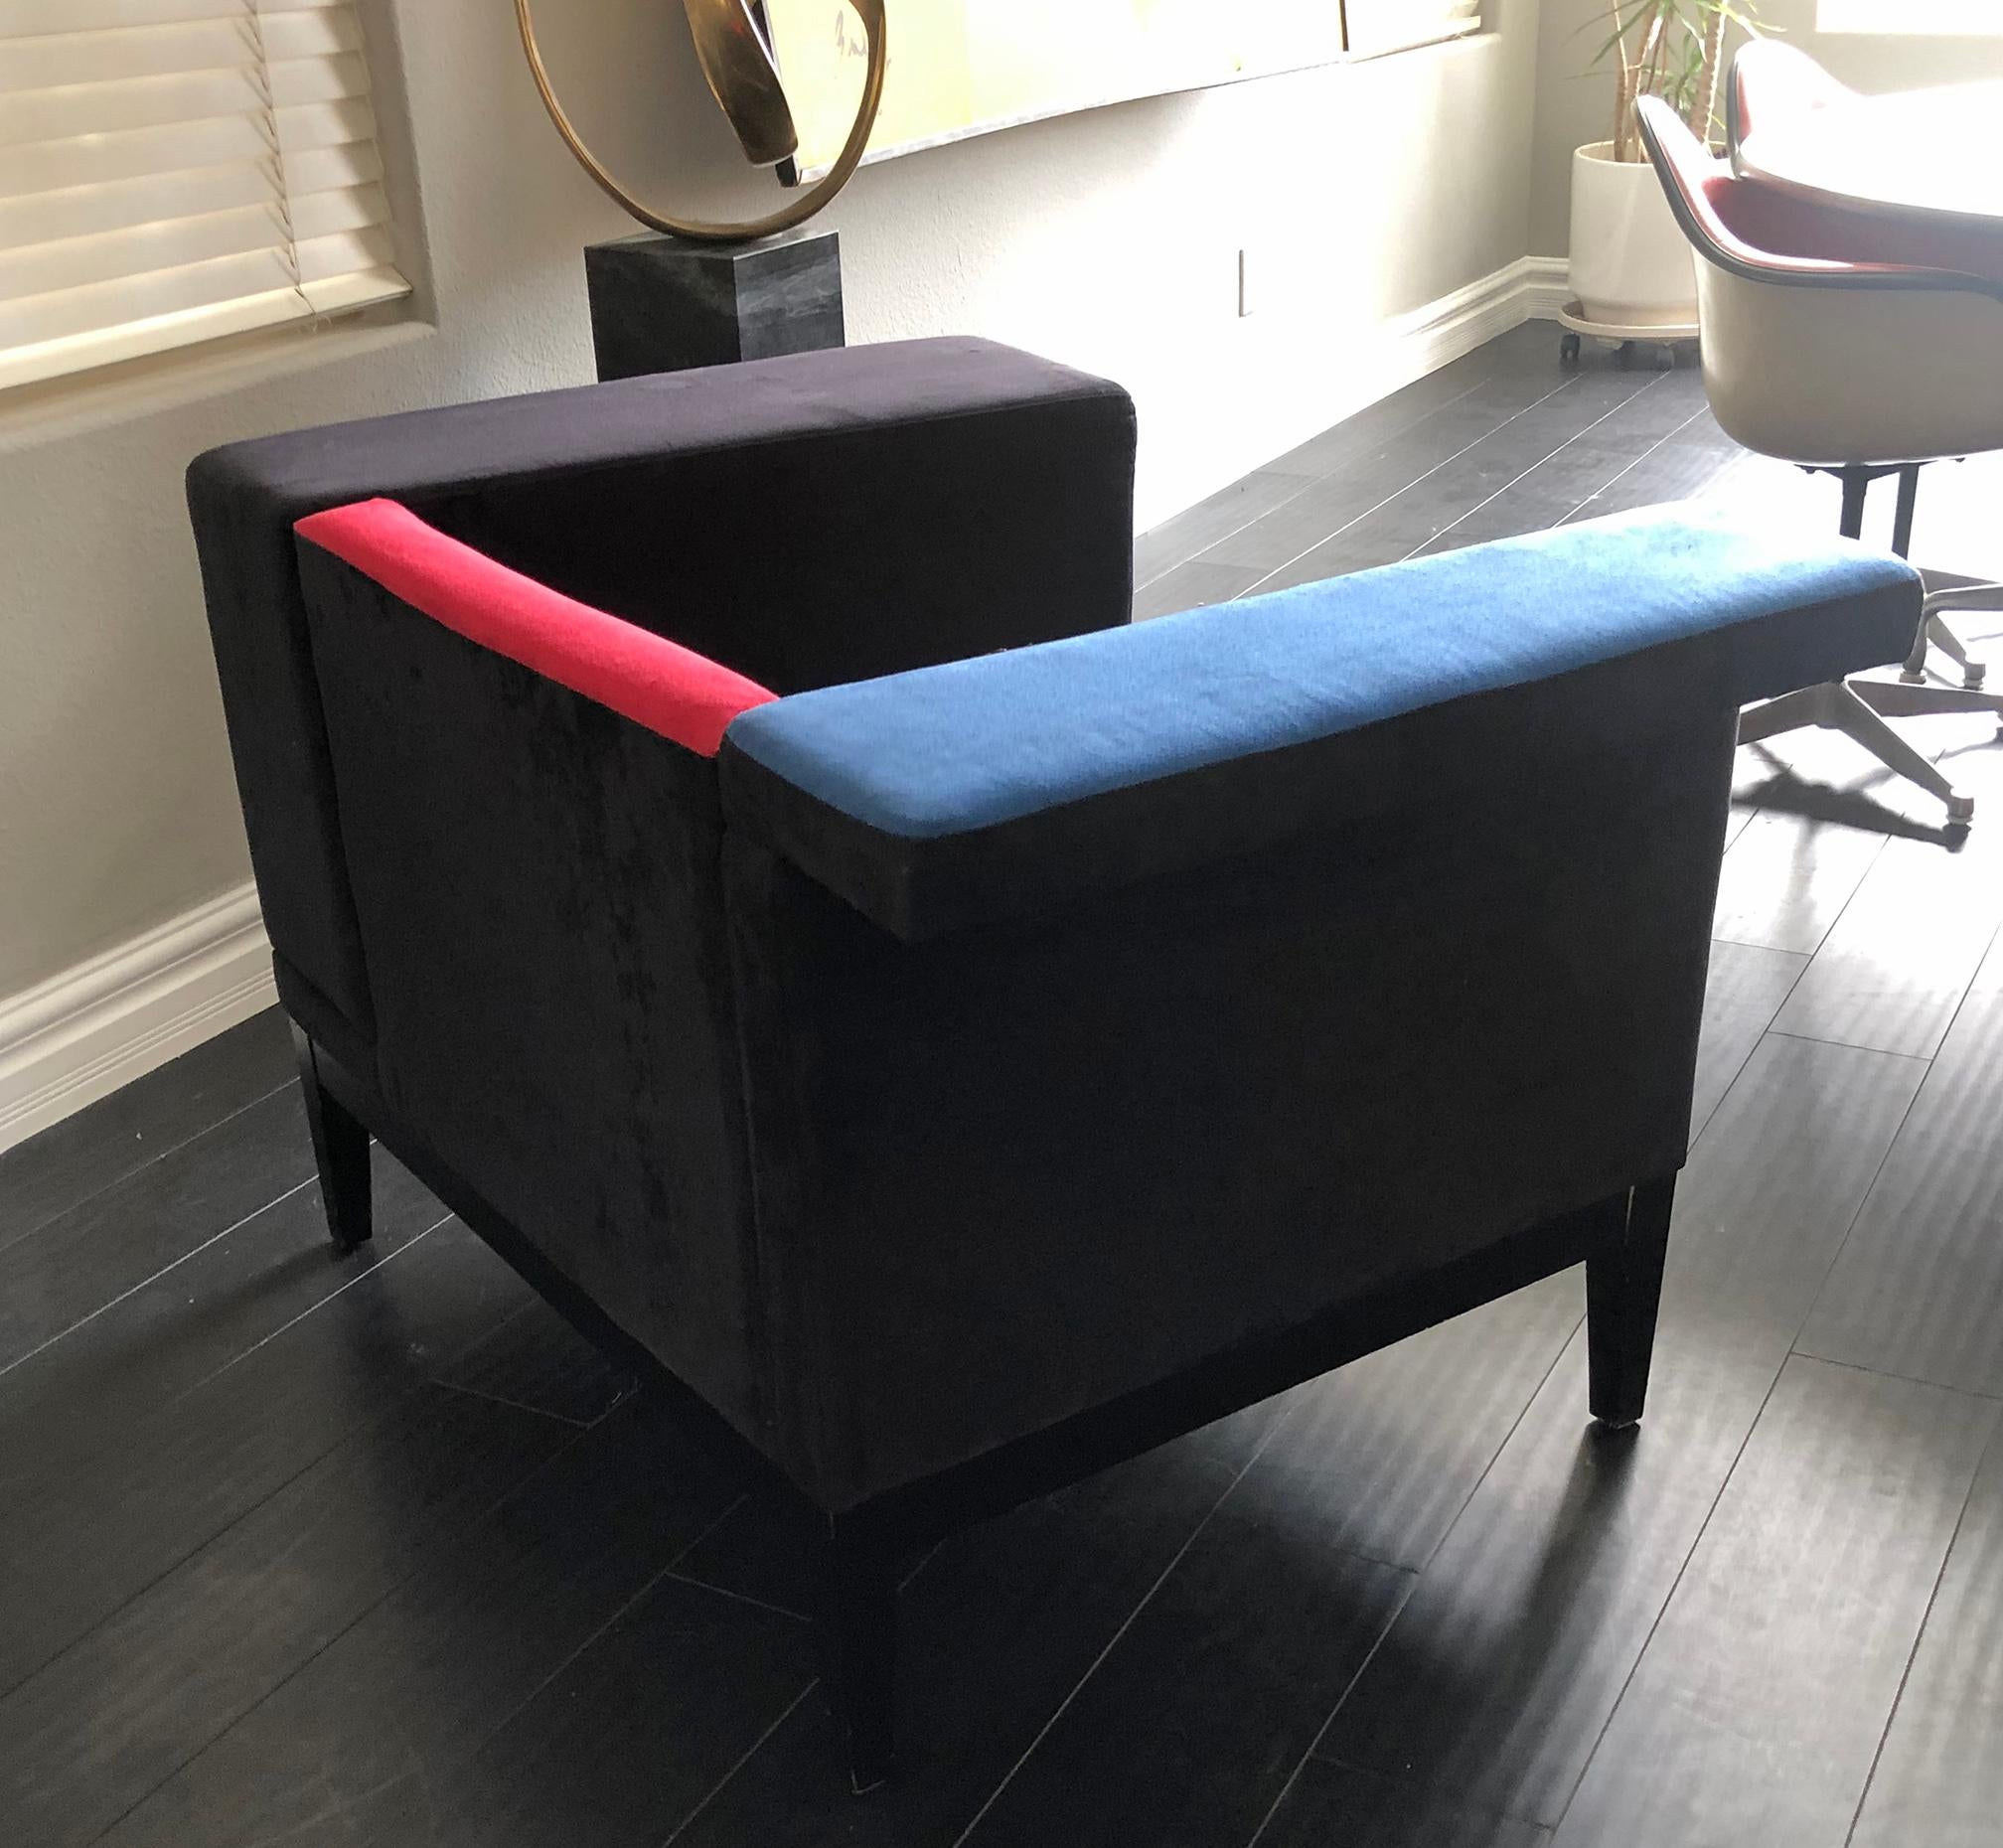 A gorgeous chair, clearly an homage to Mondrian and or the De Stijl movement. This chair is upholstered in a microsuede fabric and is sure to bring a needed pop of color to any home or environment.